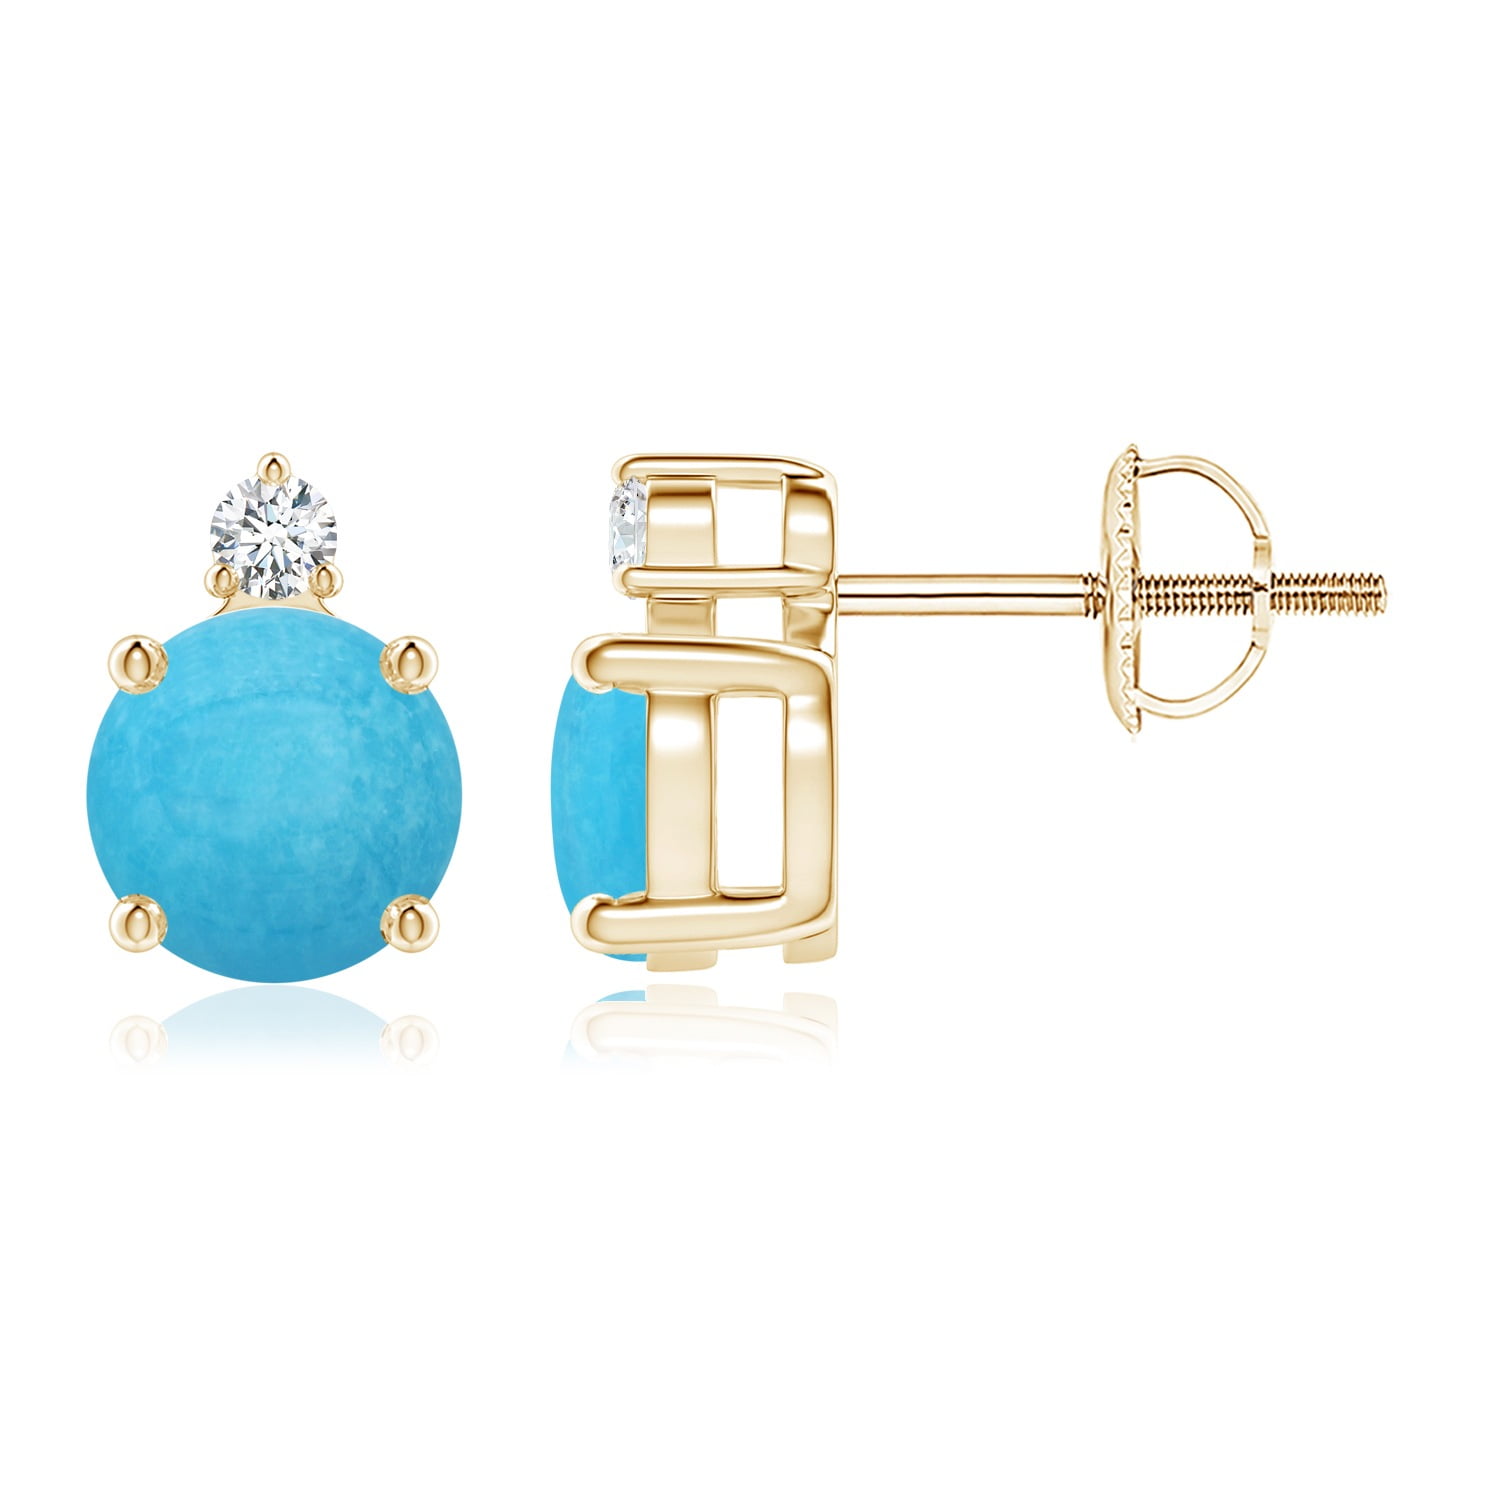 Details about   1ct Princess Classic Simulated Turquoise 18k Yellow Gold Earrings Screw back 